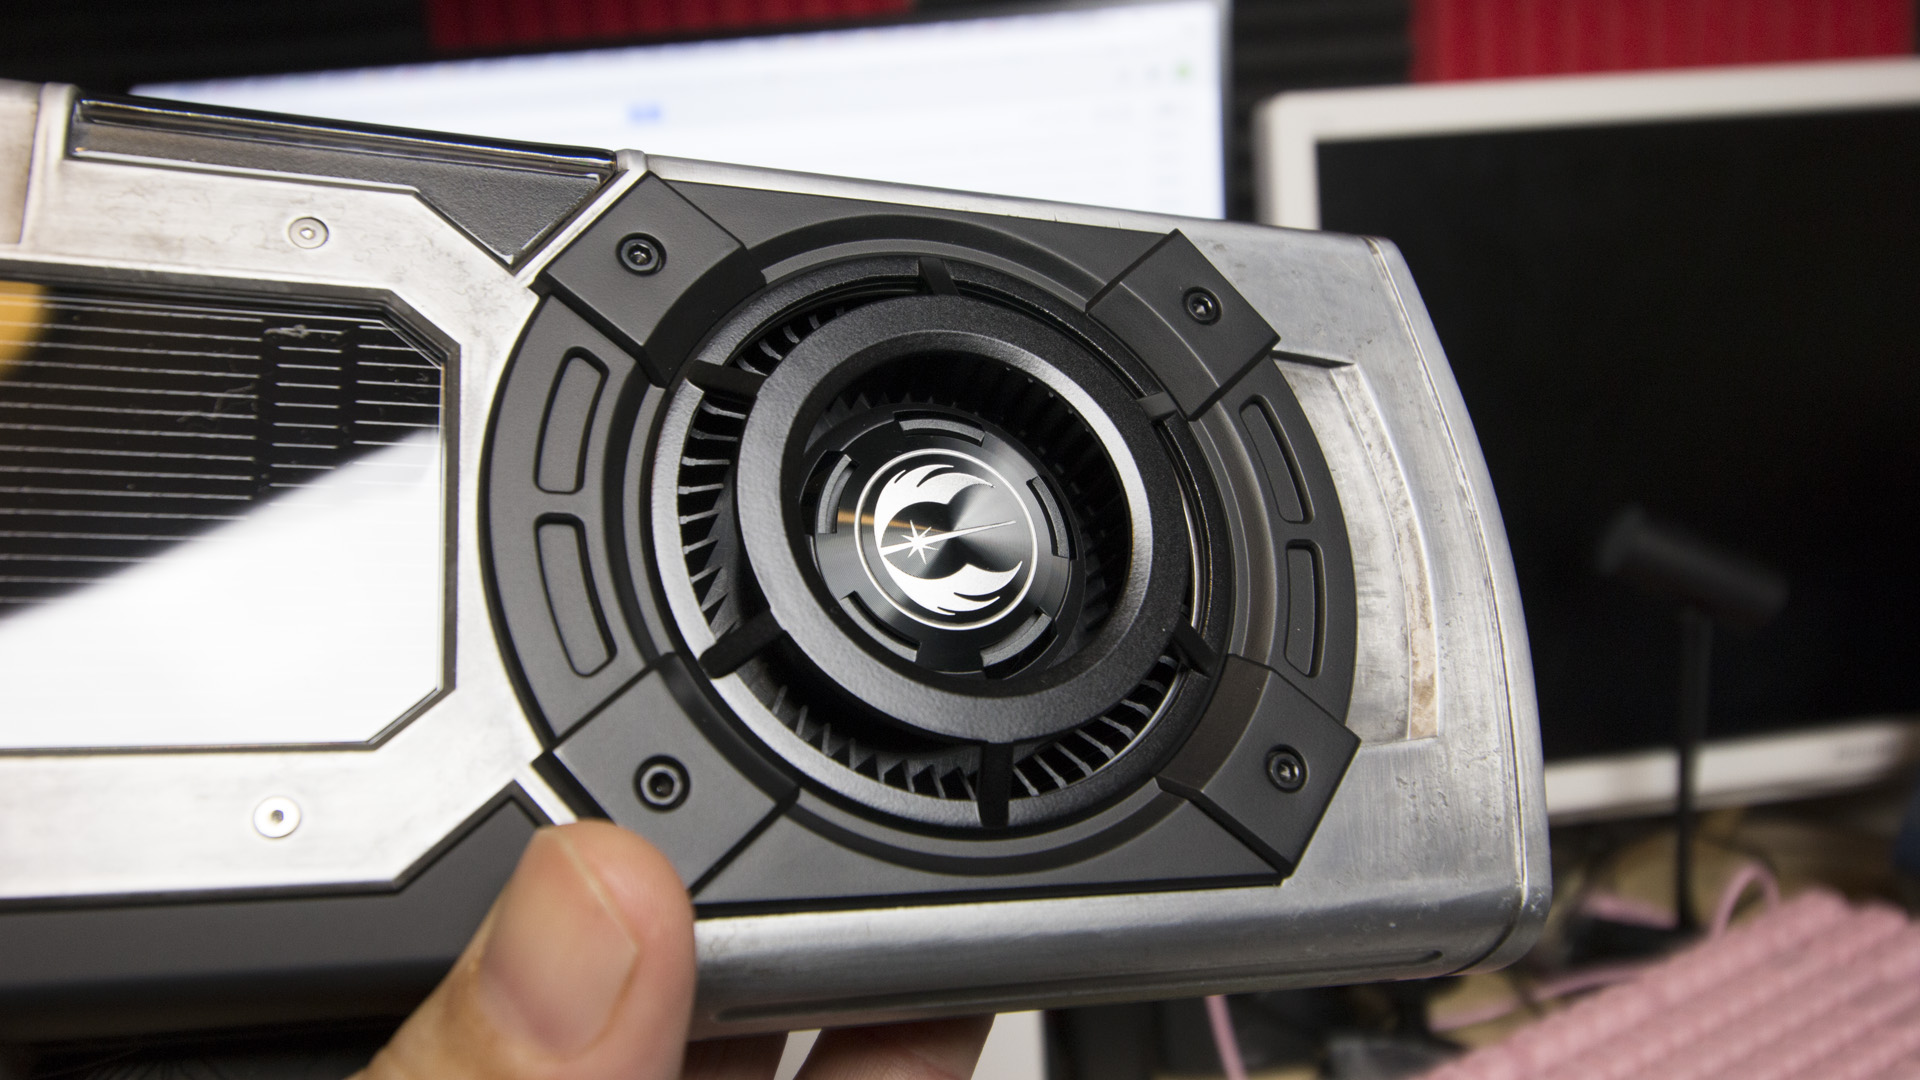 A $1,200 Graphics Card Might As Well Be Star Wars Themed